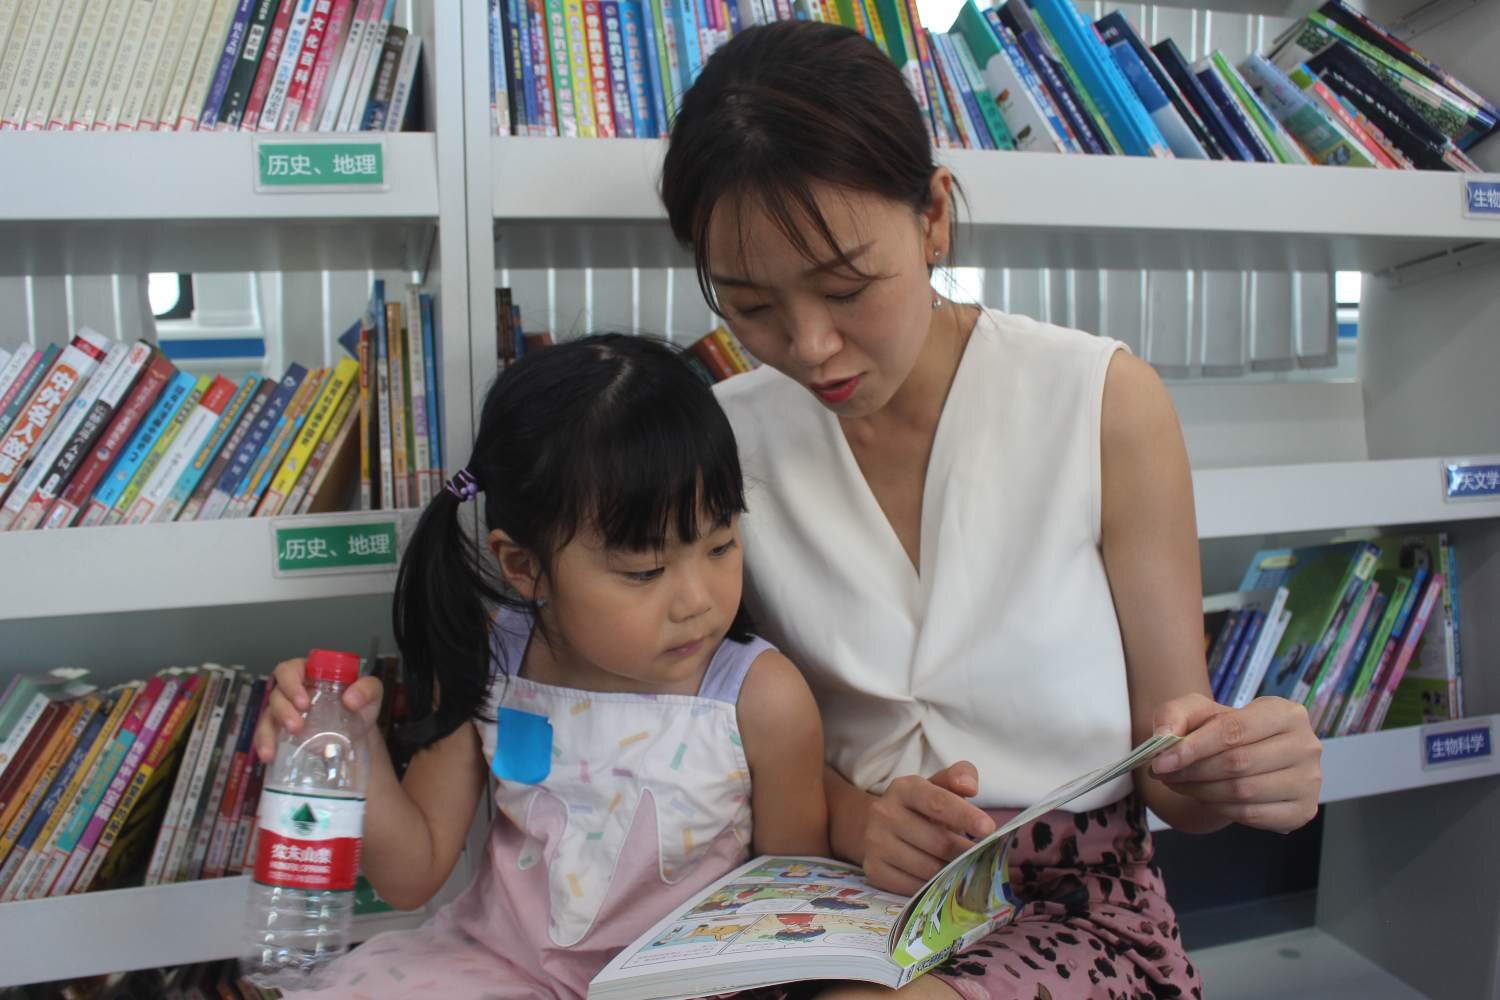 Shared reading with parents